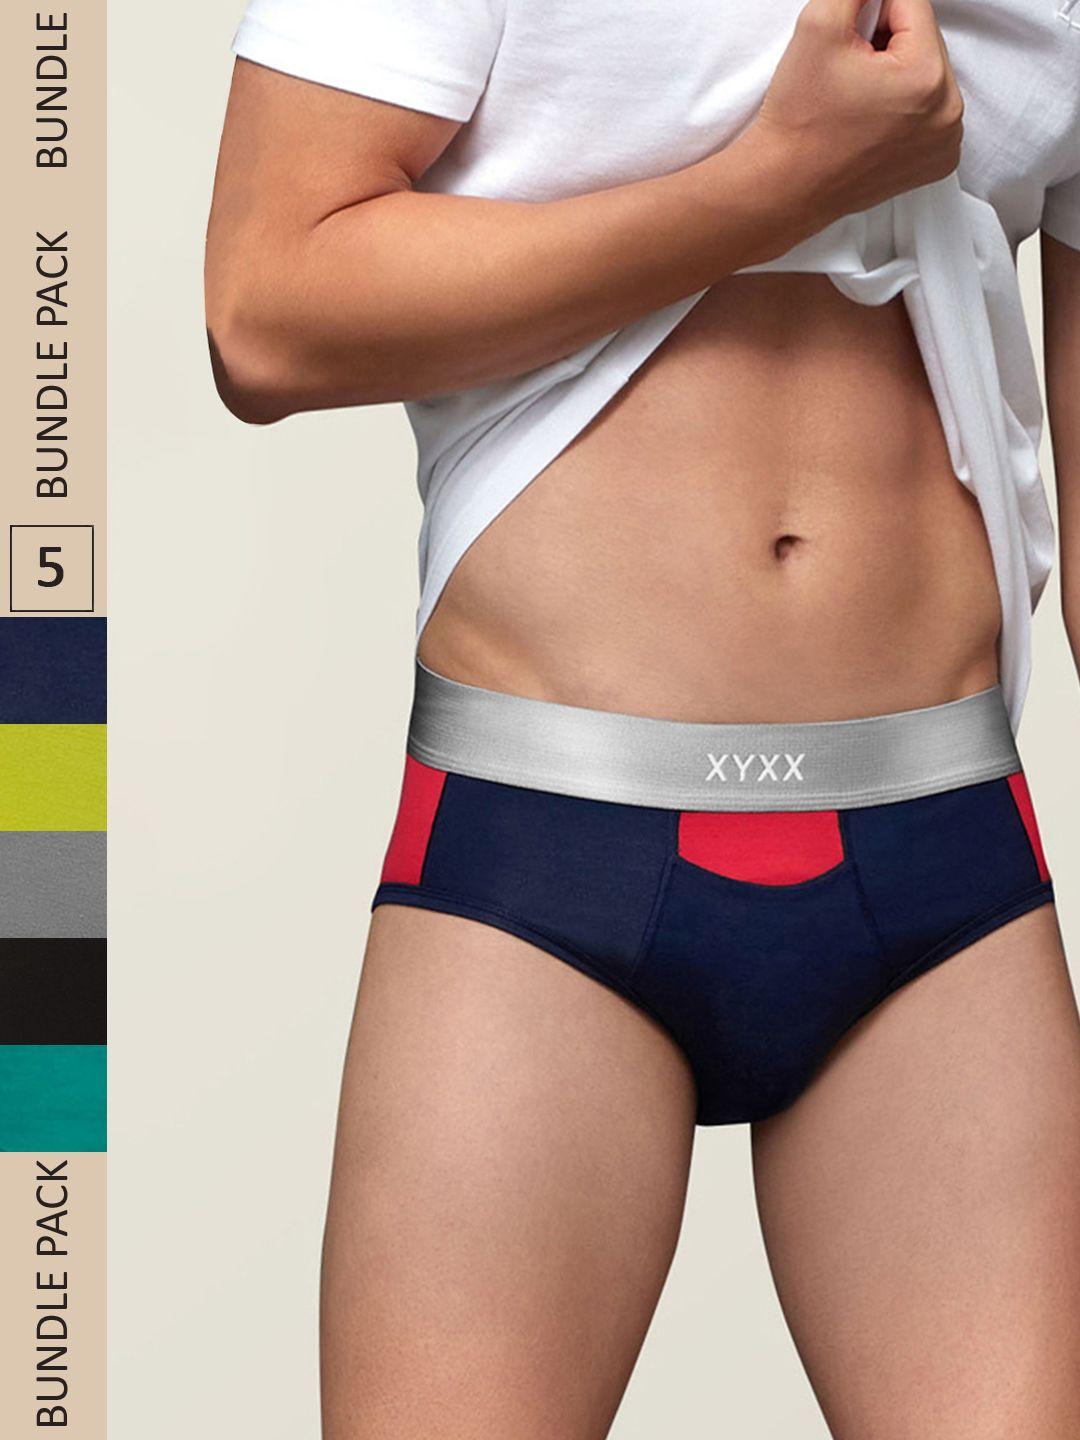 xyxx men intellisoft antimicrobial micro modal pack of 5 dualist briefs xybrf5pckn107